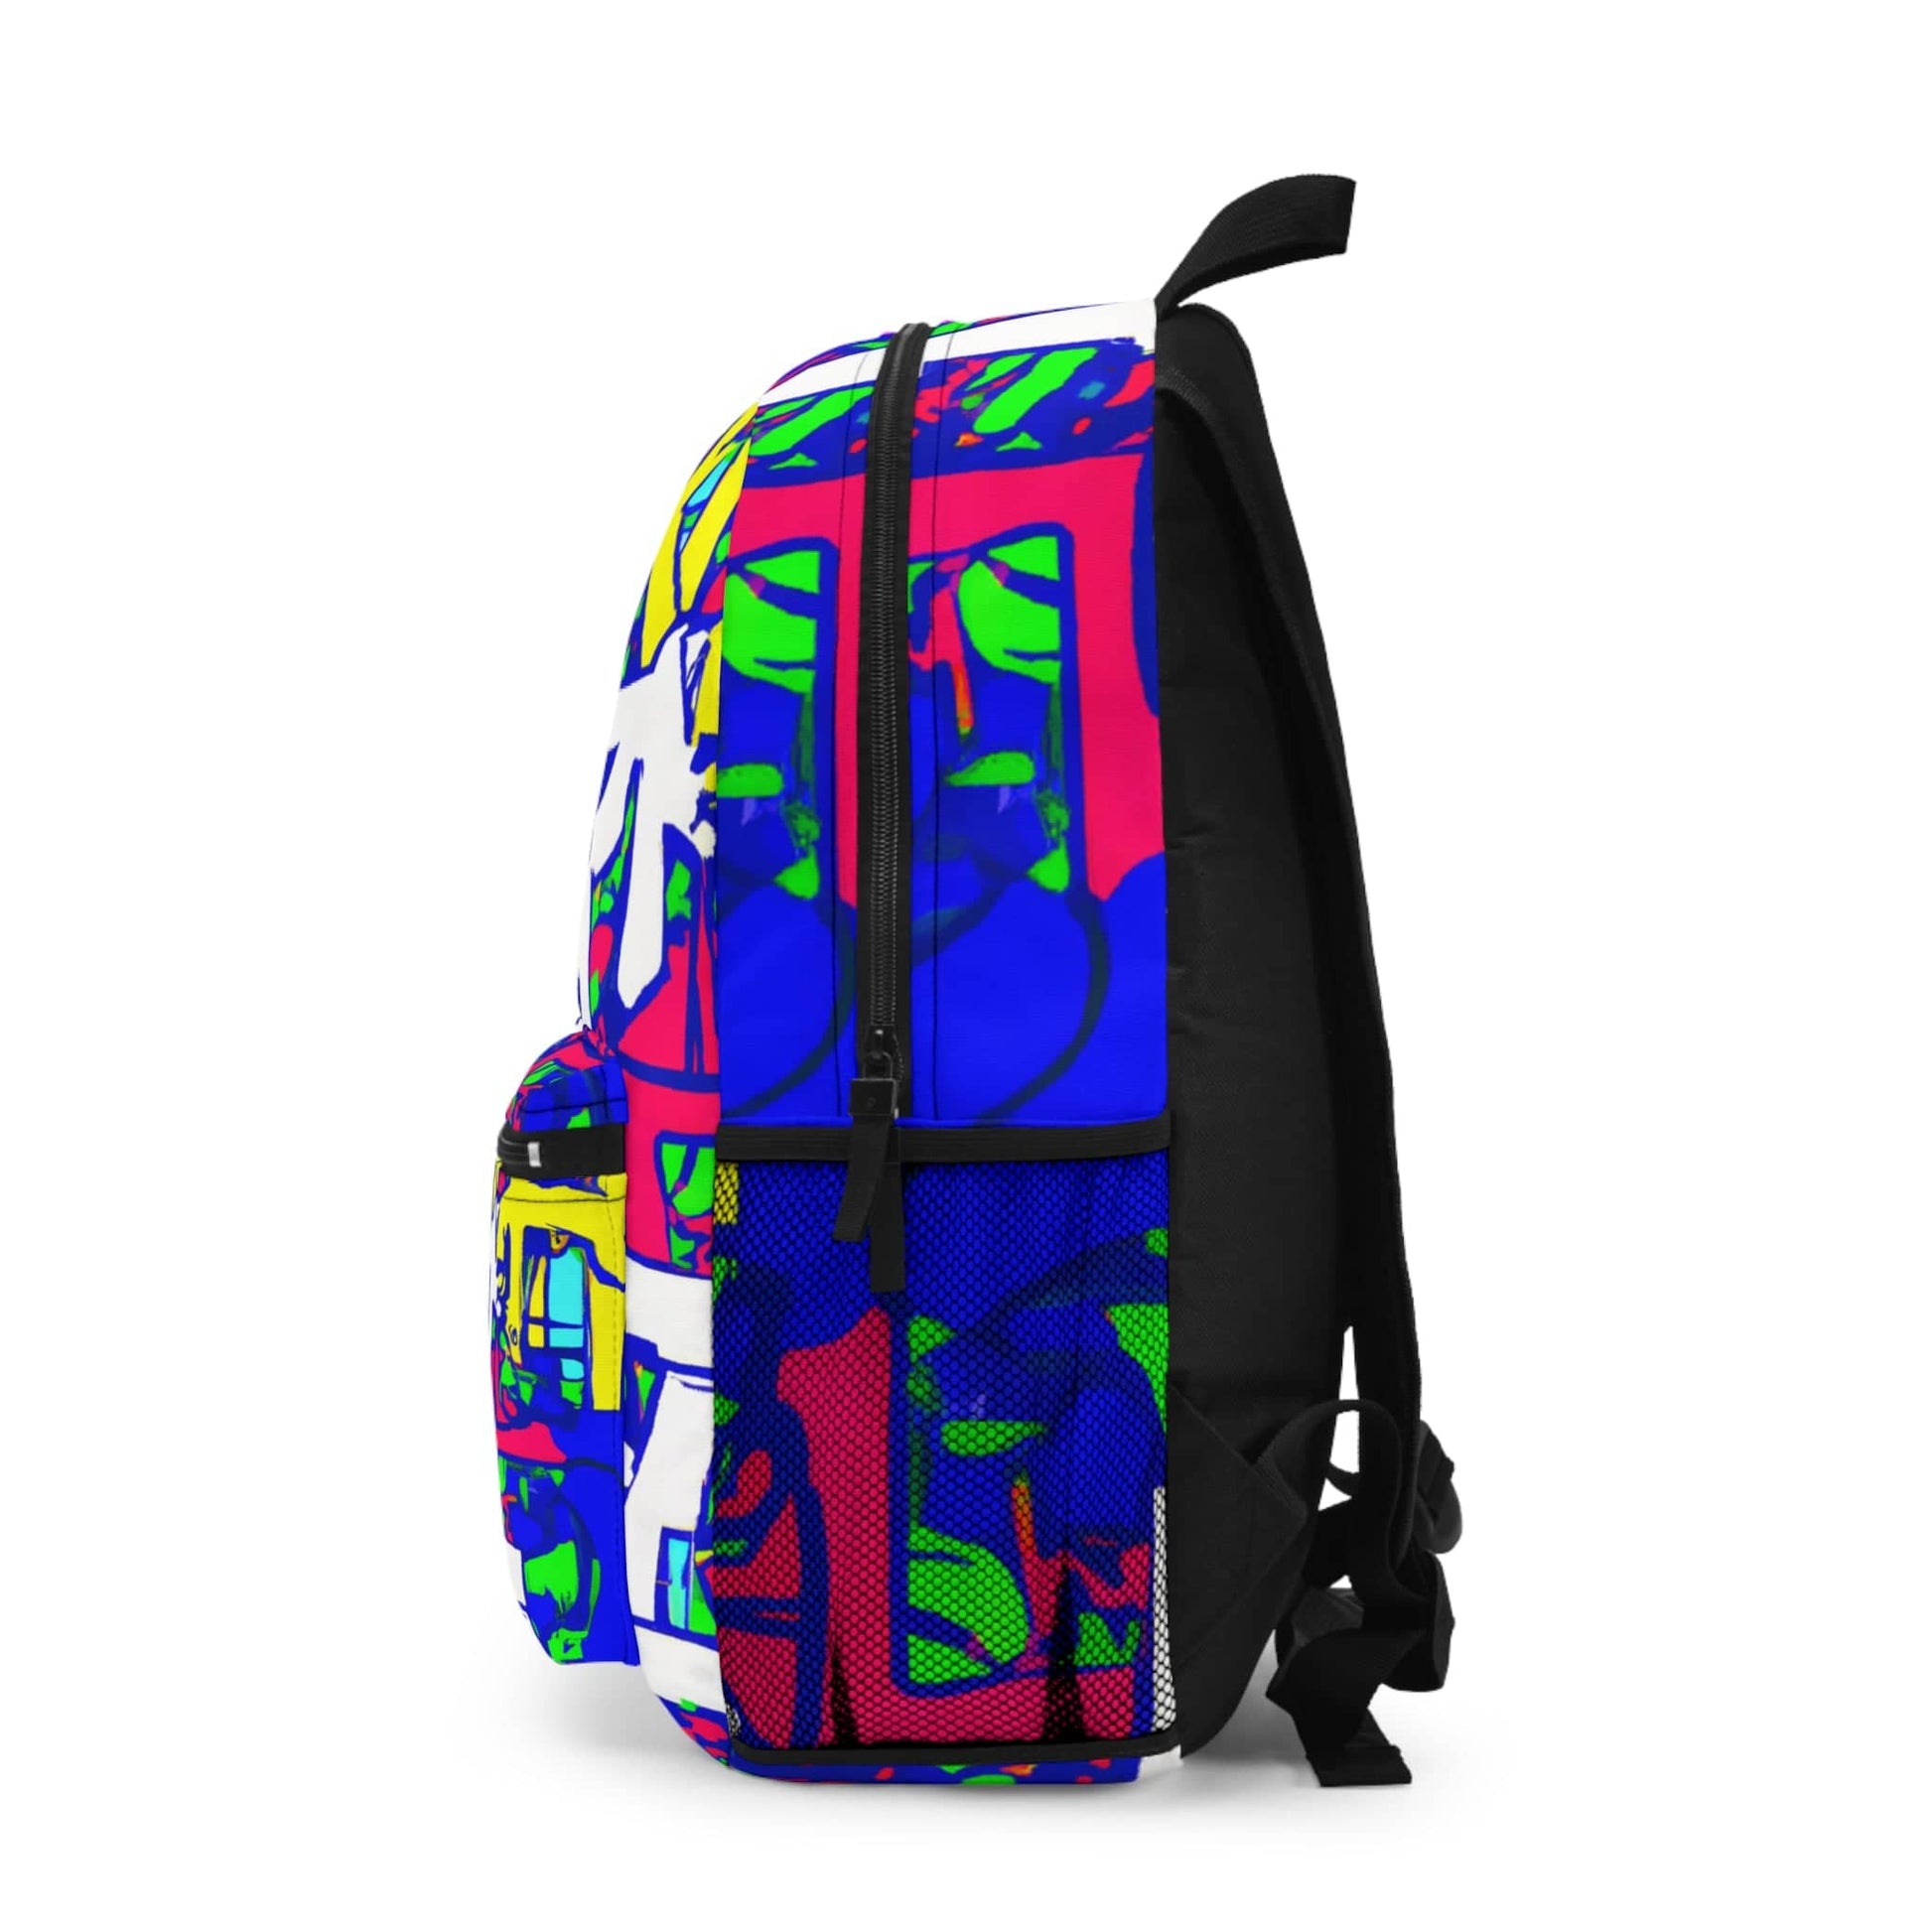 OrientalGraffiti: The Exquisite Canvas Chinese Graffiti Backpack for School, Travel, Art Lovers, and Trendsetters Bags Bigger Than Life   